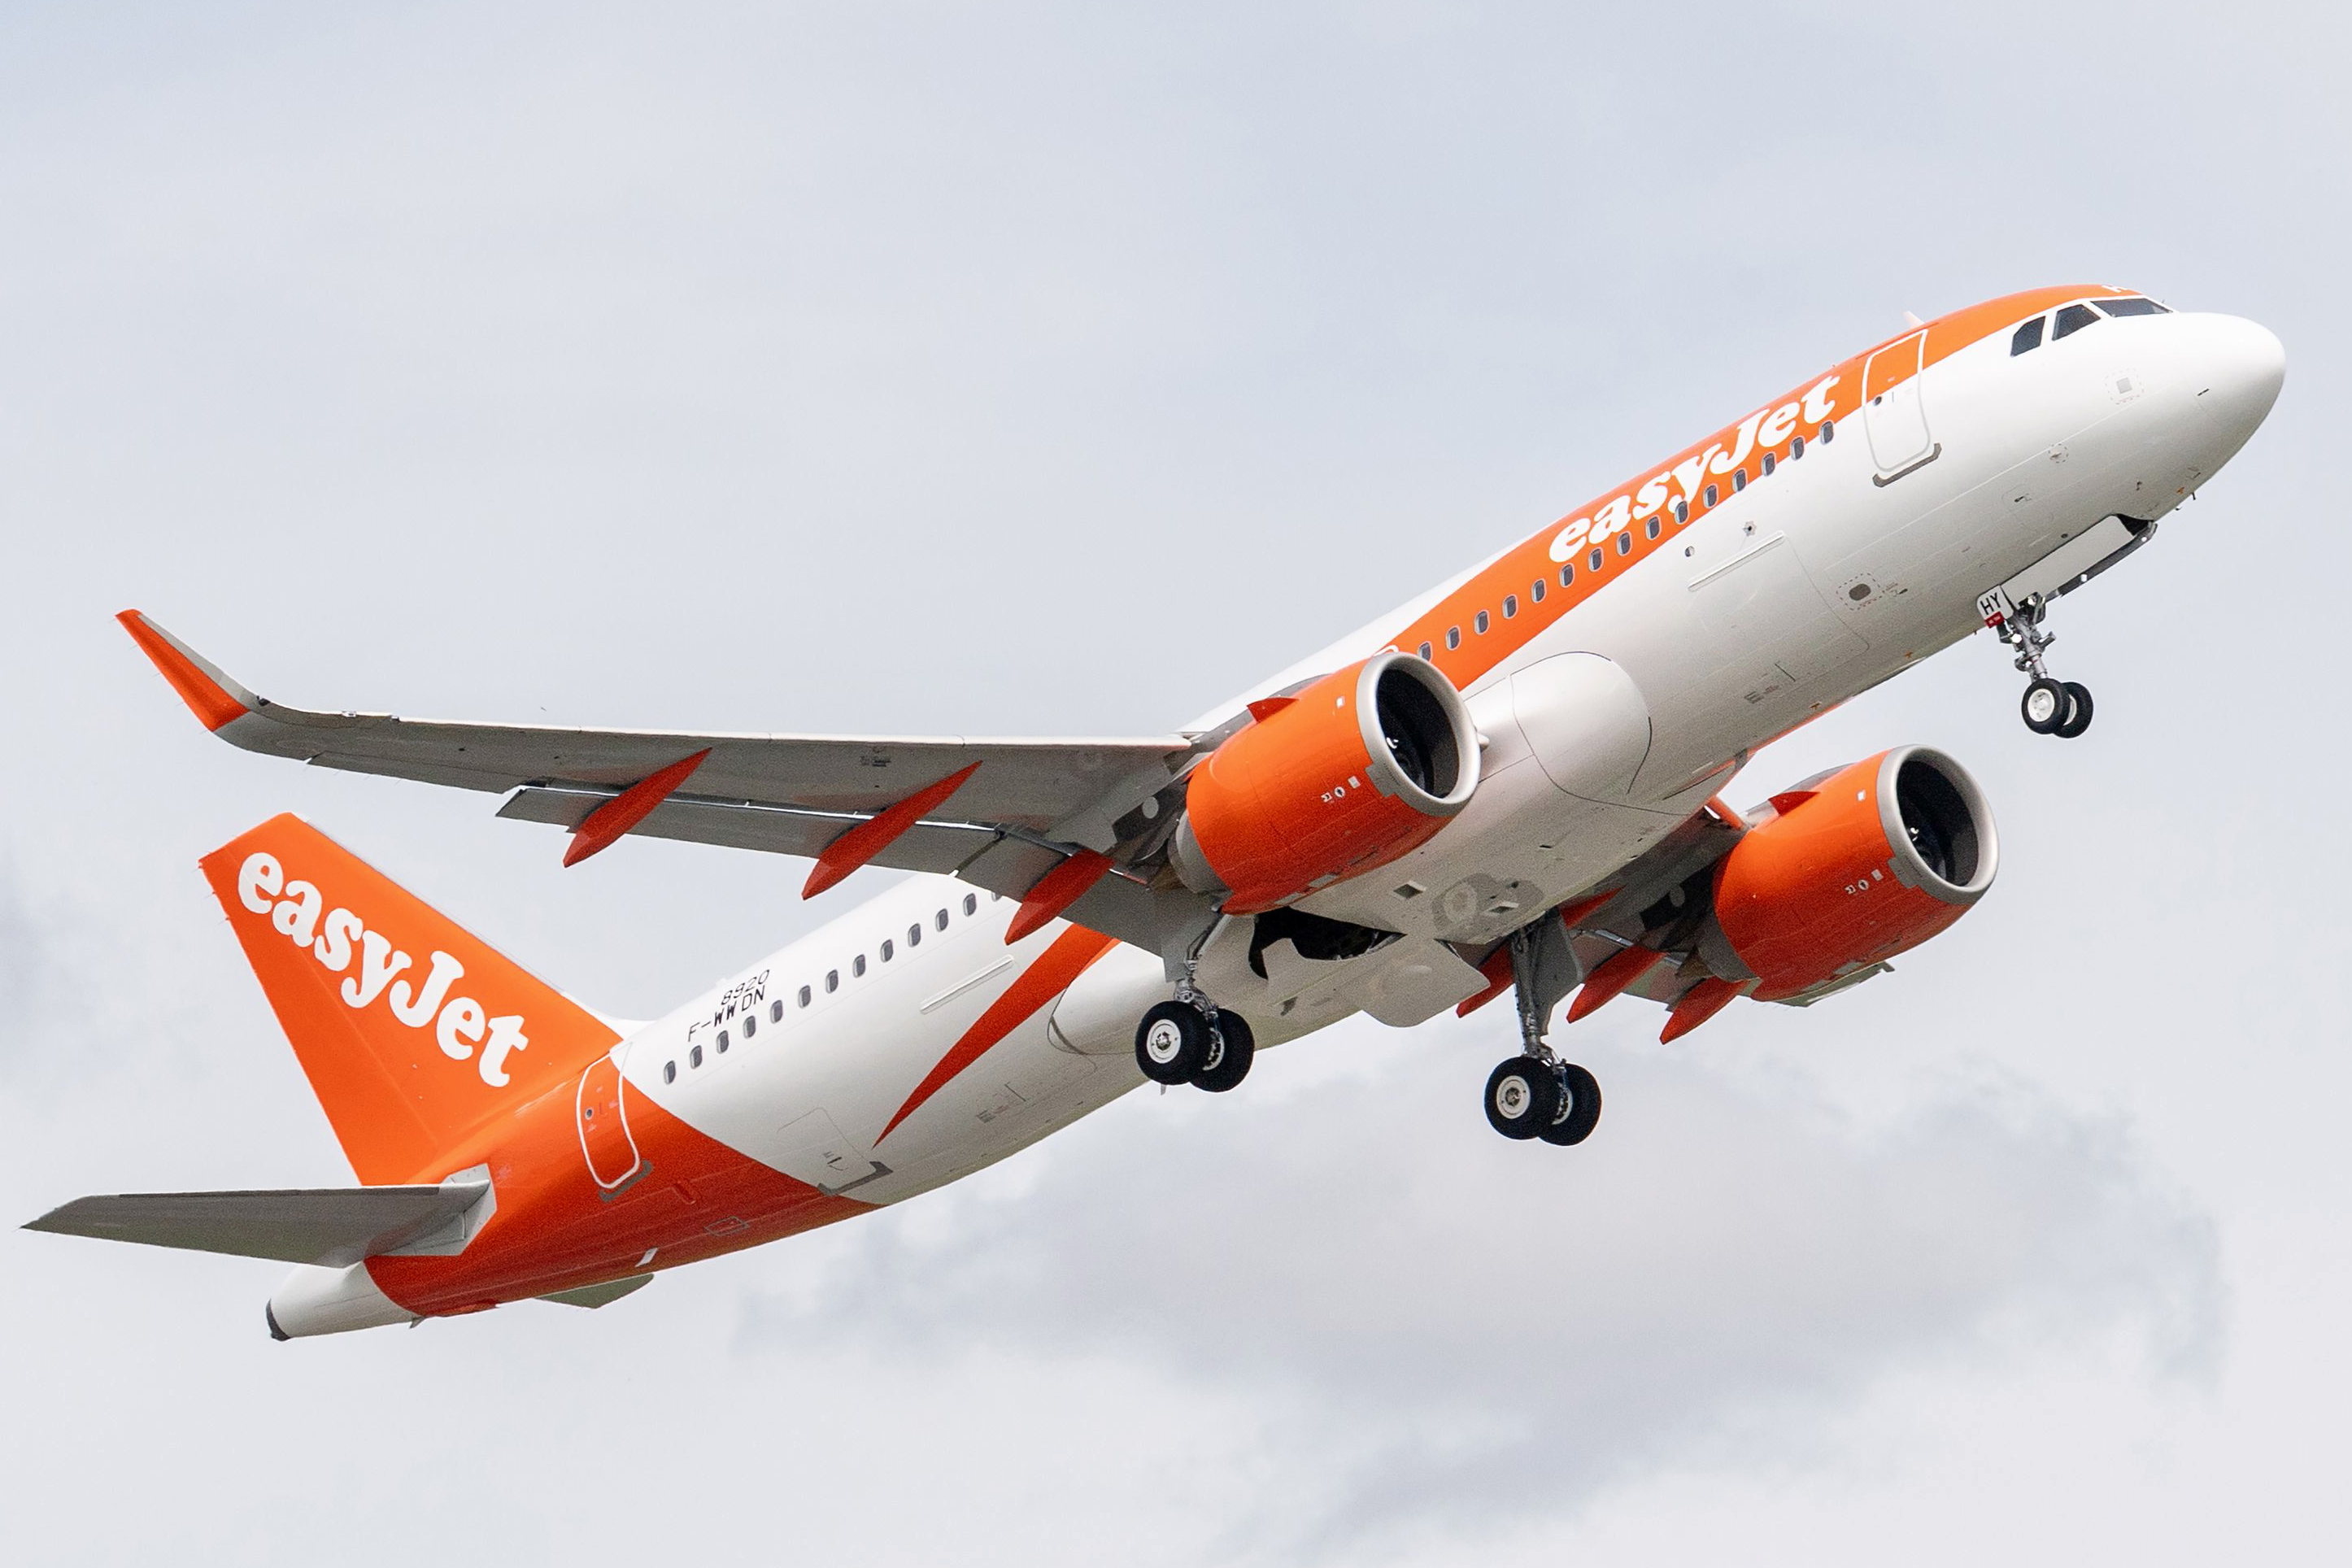 easyJet A320neo. Click to enlarge.